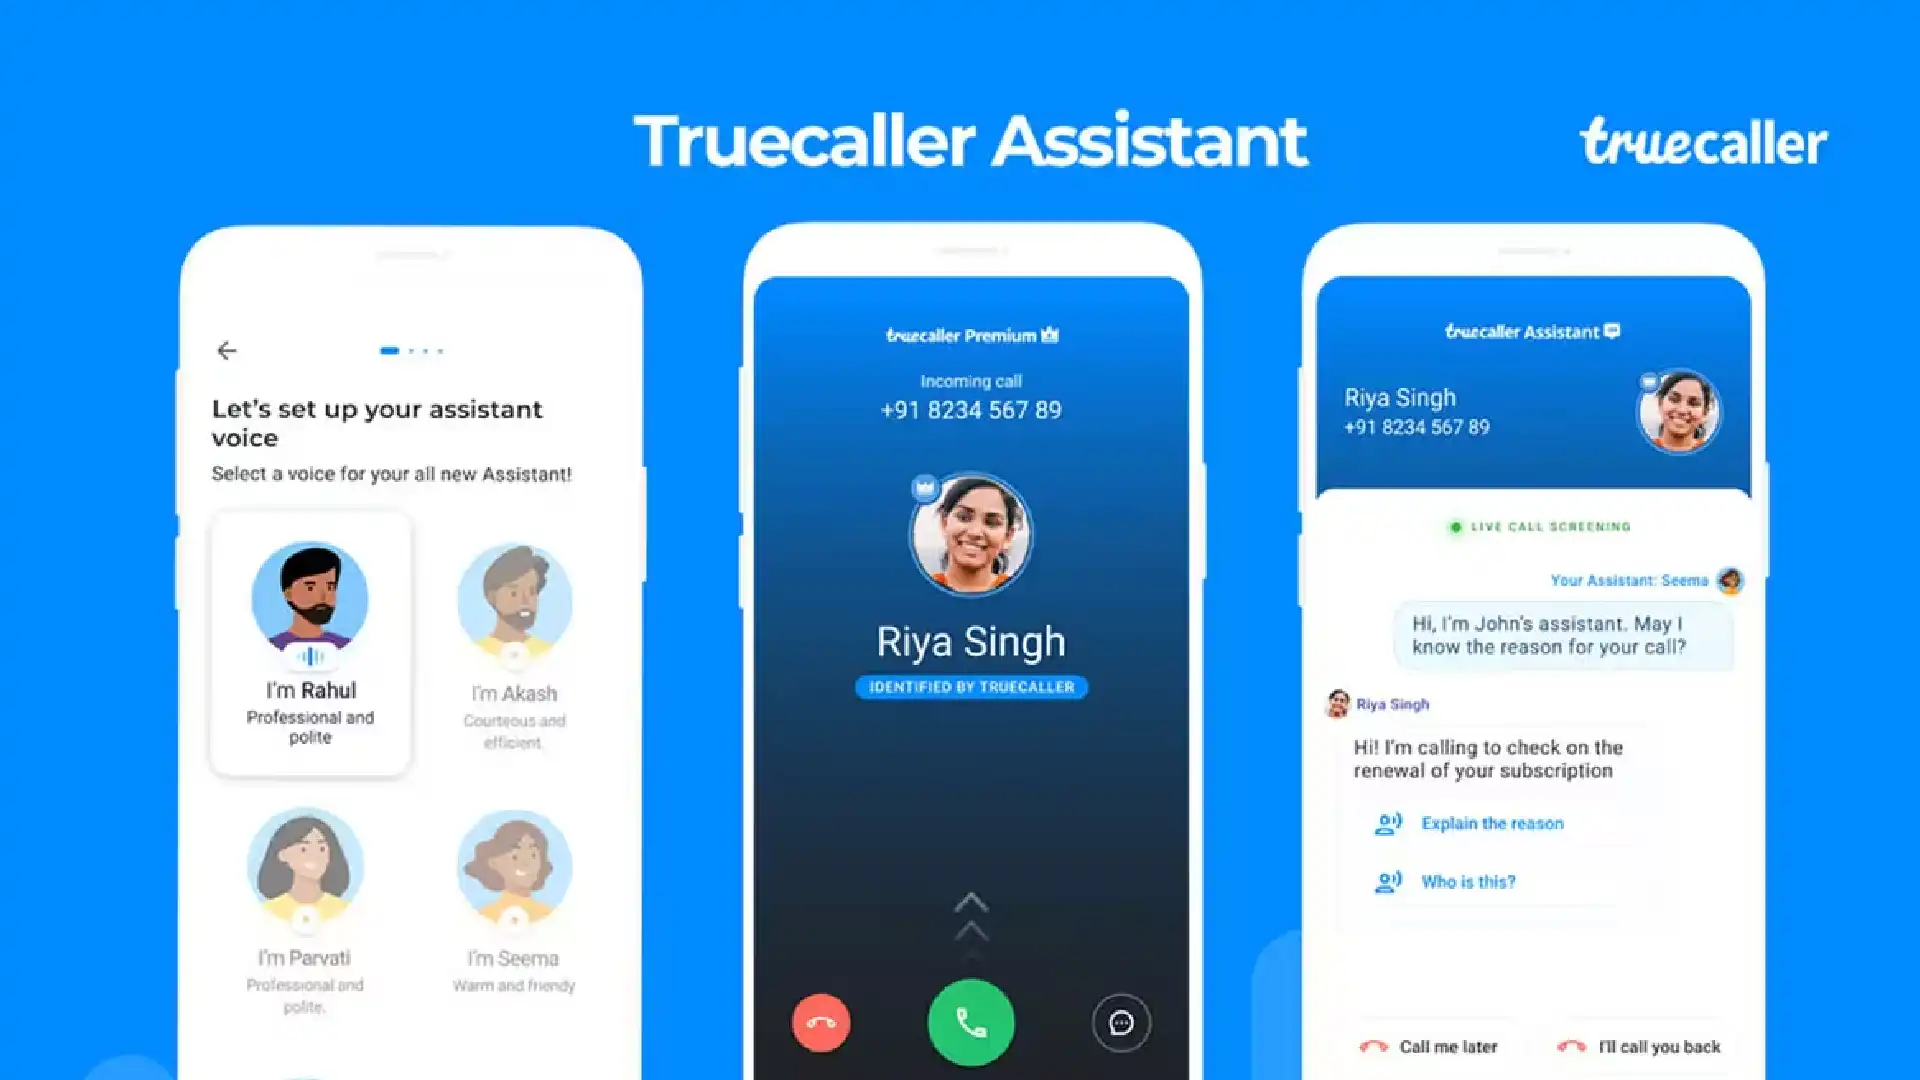 Truecaller Introduces AI-Powered Assistant in India to Enhance Call Experience